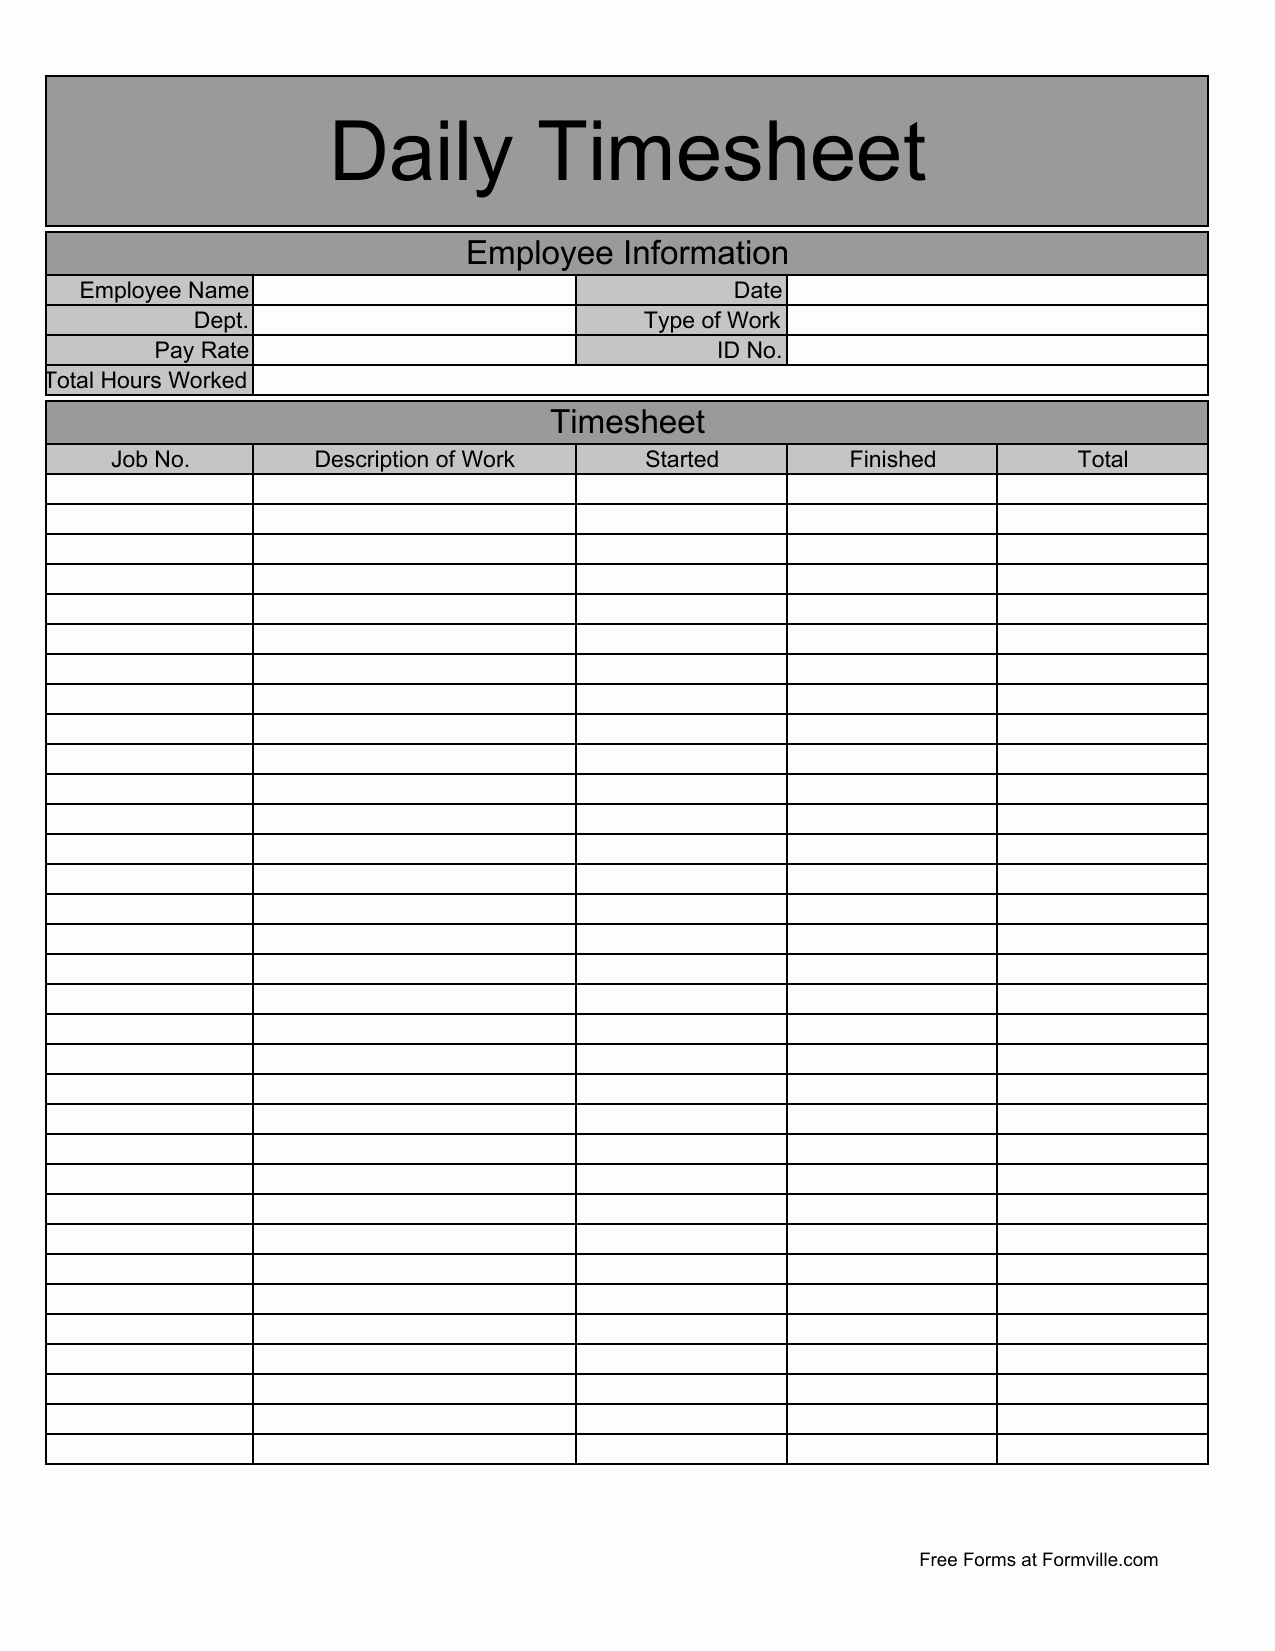 Timesheet Software Download And Download Daily Timesheet Template - Free Printable Time Sheets Pdf